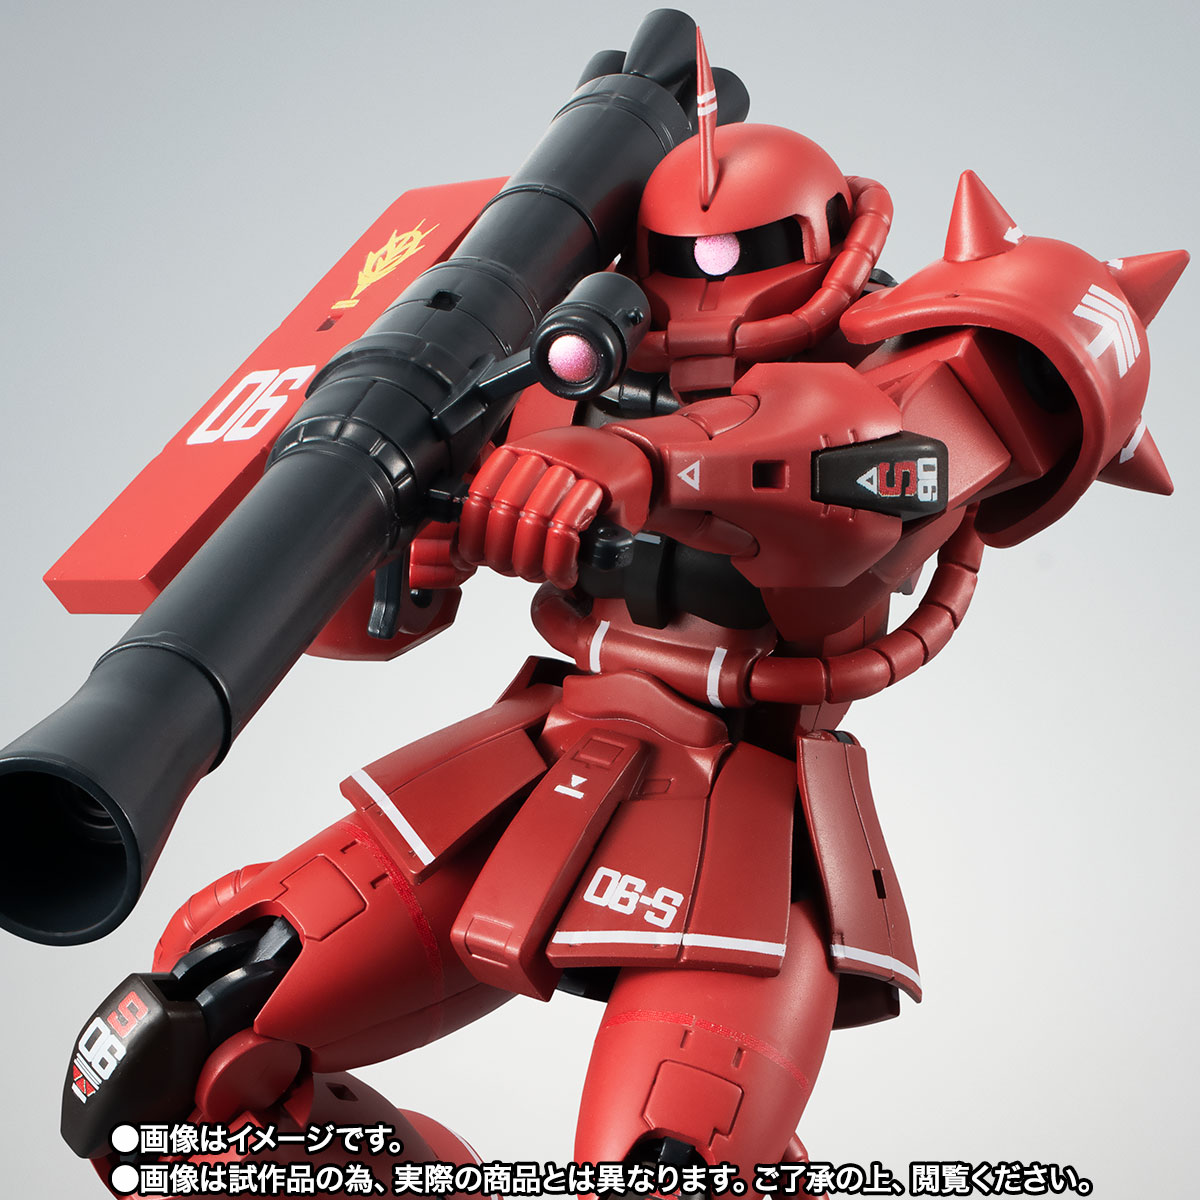 ROBOT魂 <SIDE MS> MS-06S シャア専用ザク ver. A.N.I.M.E. ～リアル 